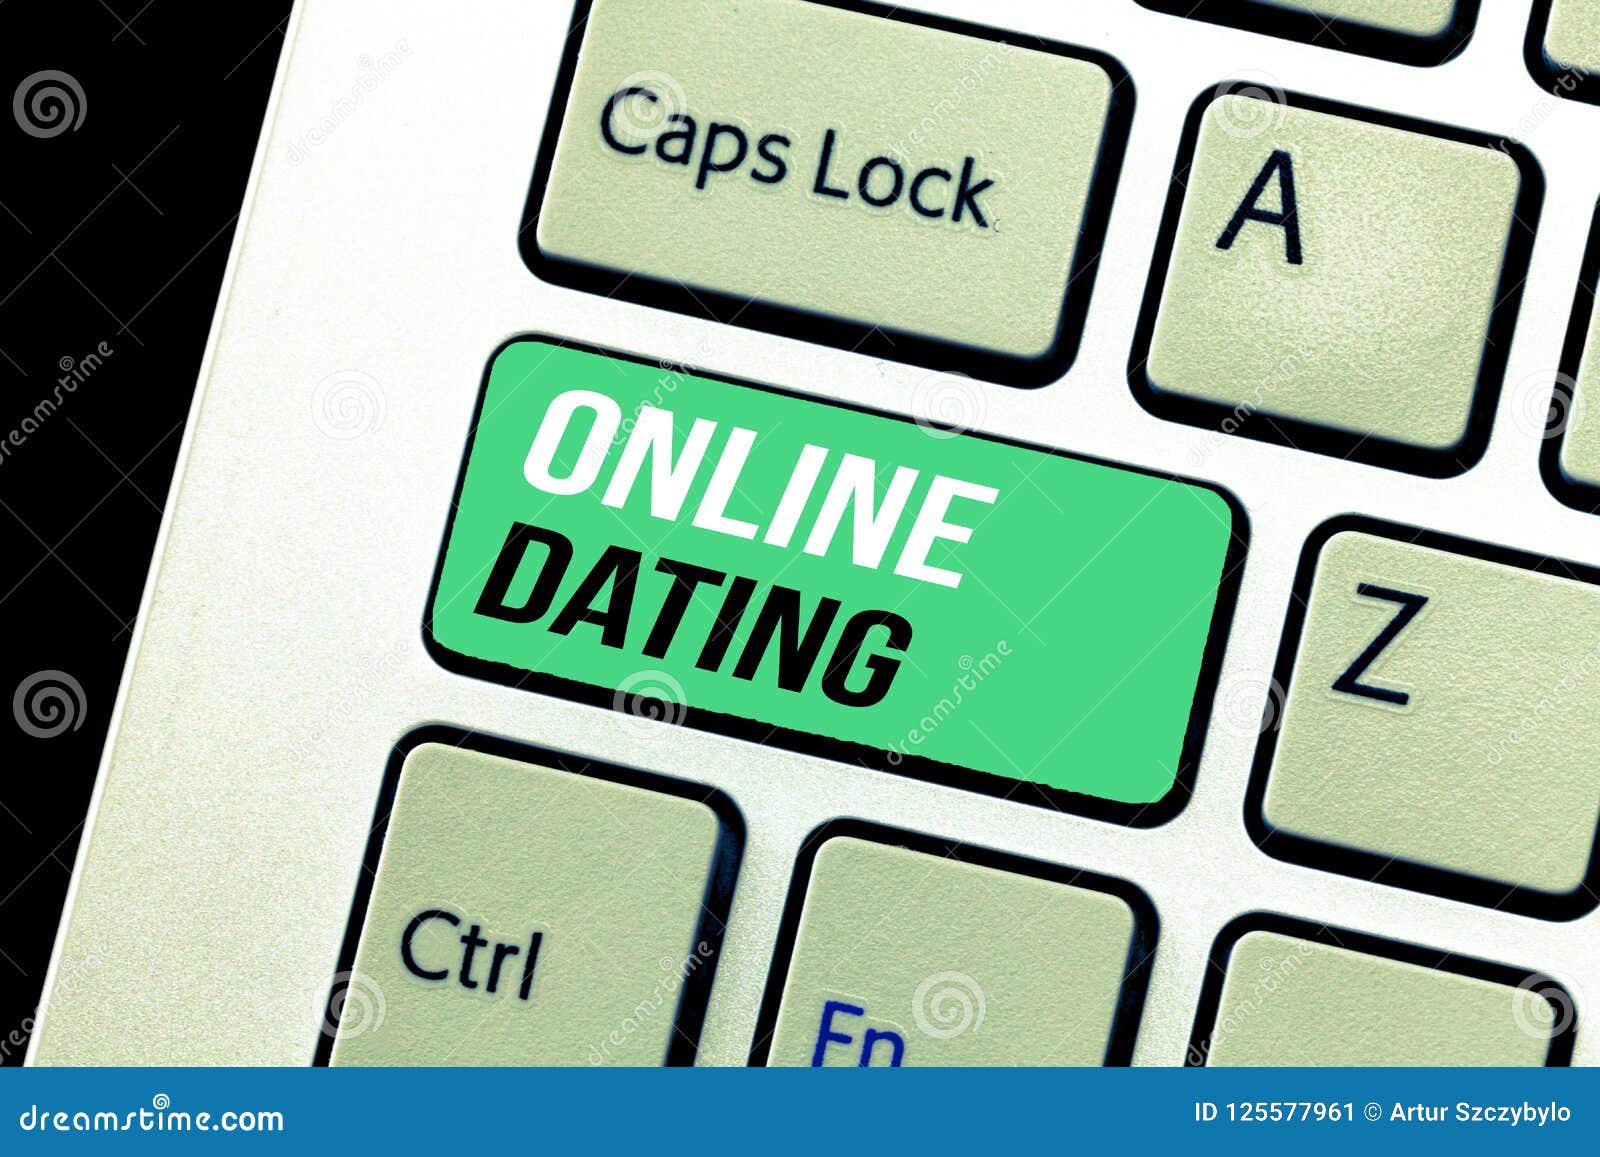 My Top 5 Online Dating Tips for Busy Professionals - We Just Clicked